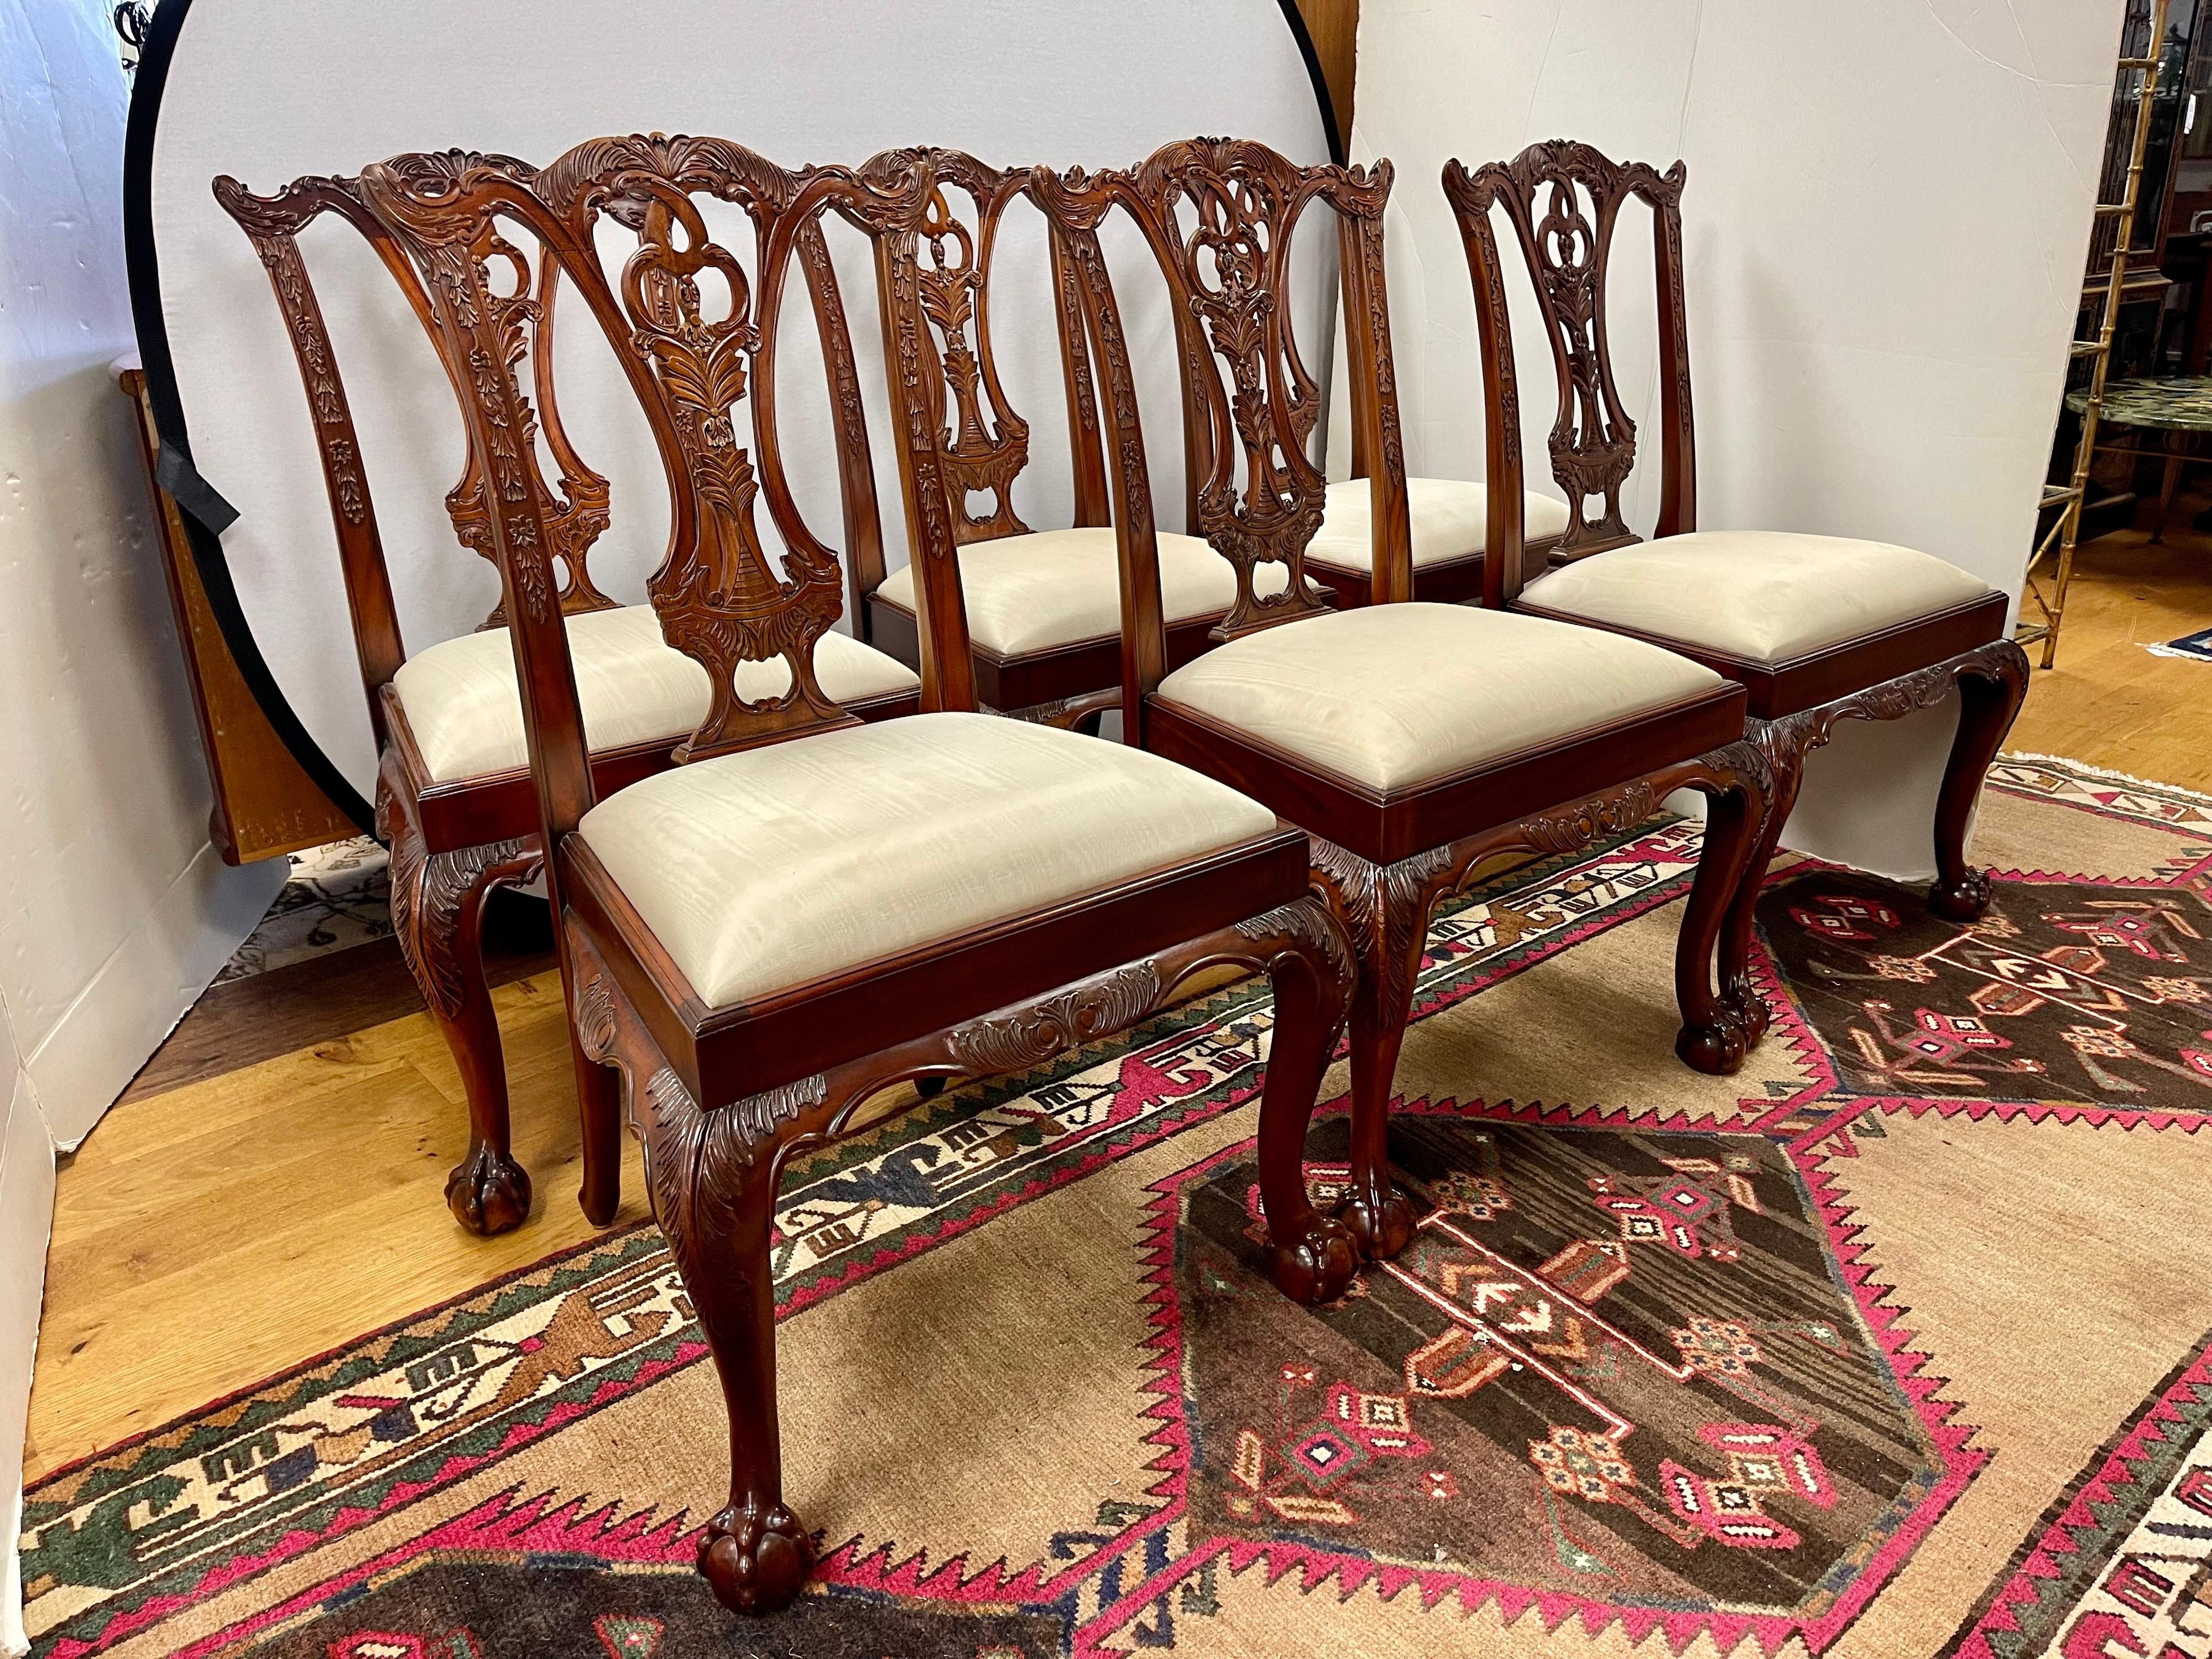 Set of six Maitland Smith mahogany Chippendale style dining chairs. Listing includes (6) side chairs with neutral silk upholstered seats, solid wood construction, beautiful wood grain, finely carved details, quality craftsmanship, great style and